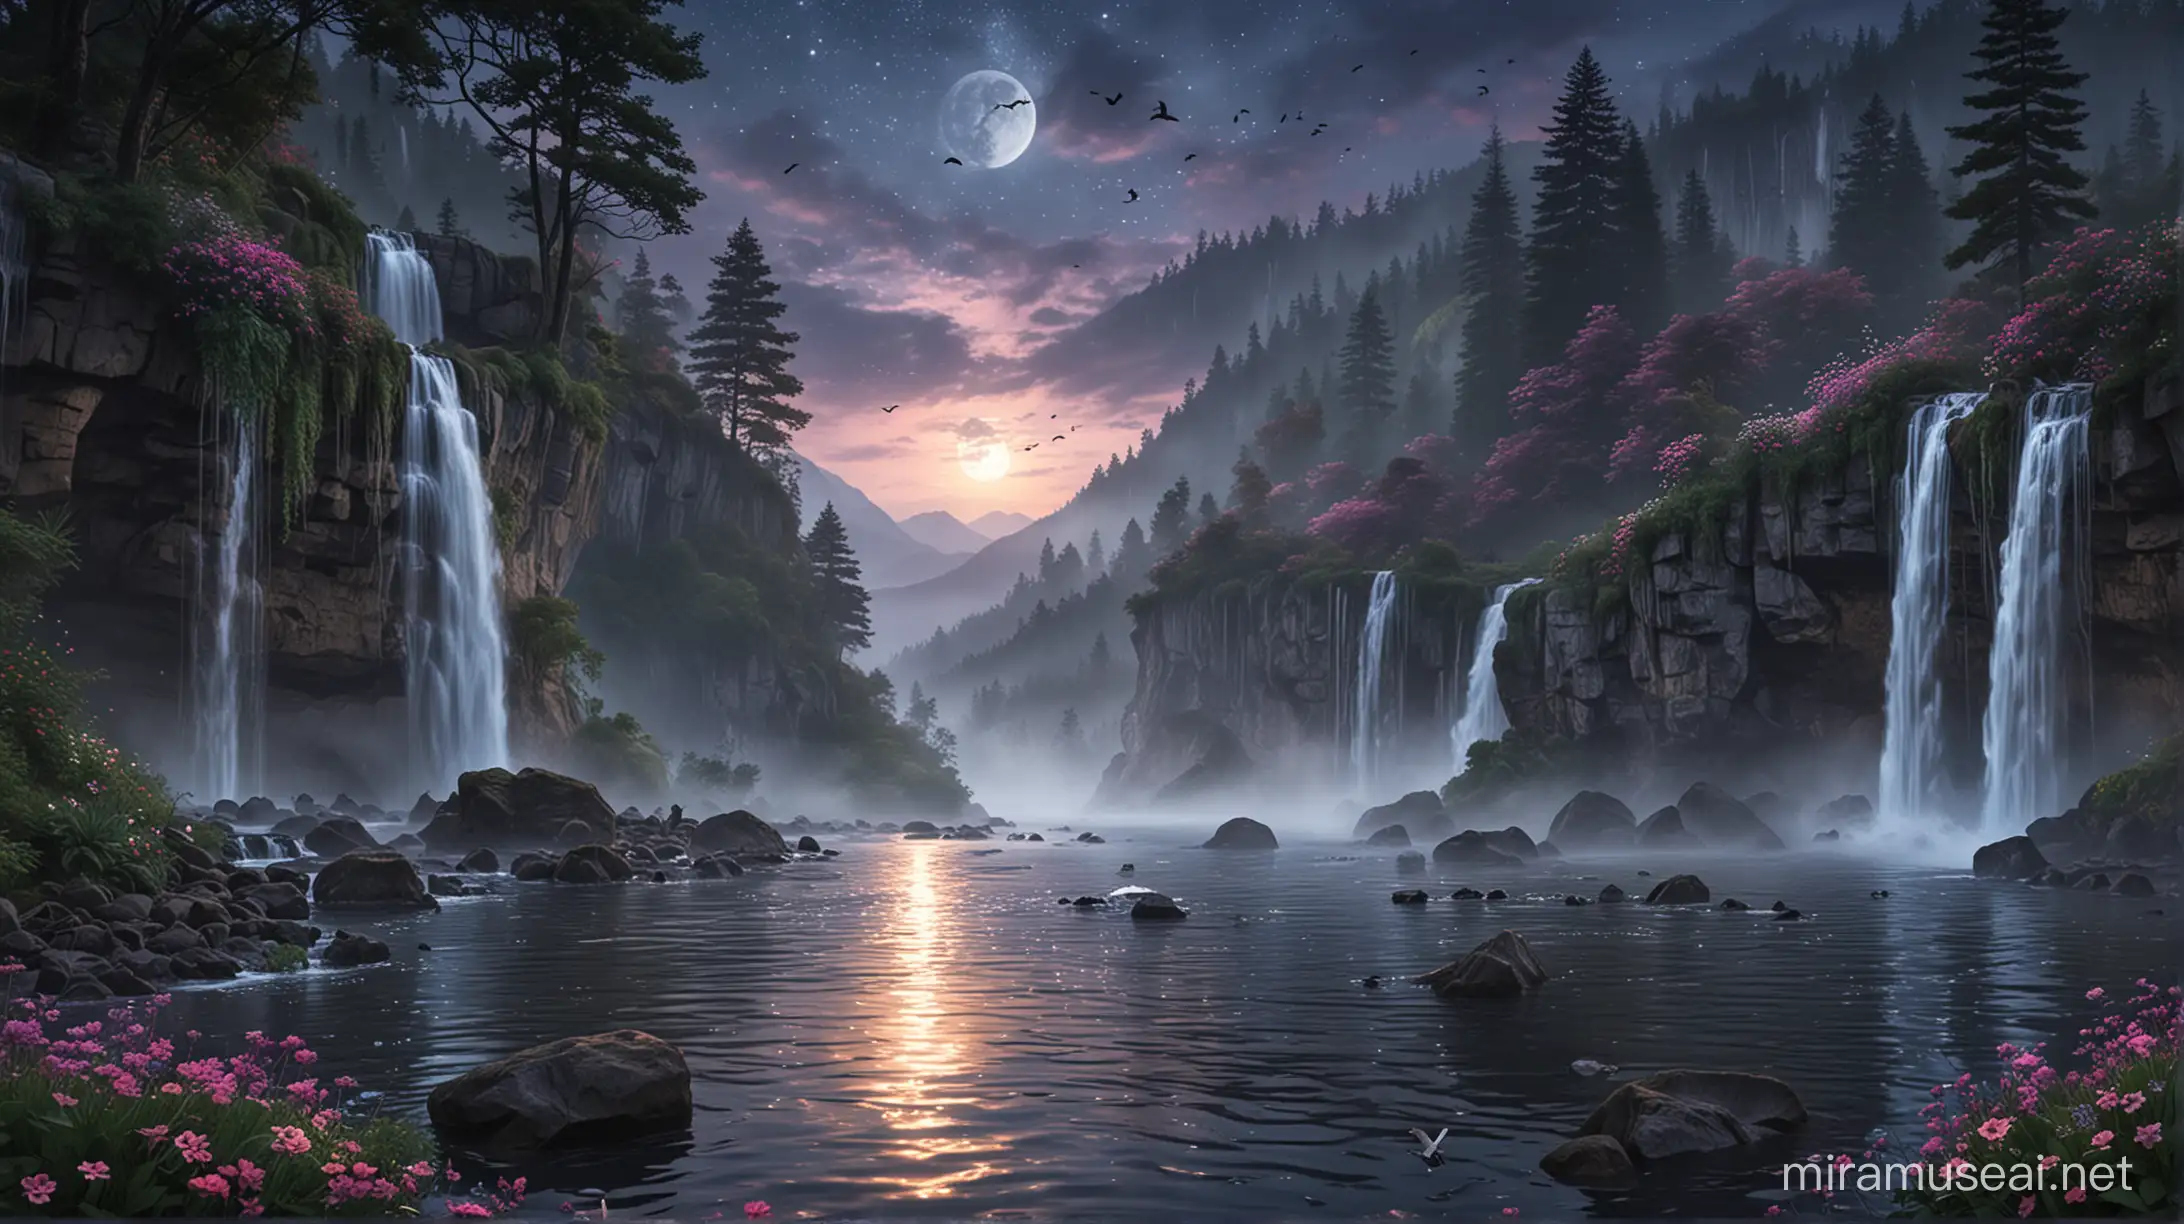 Serenity
Tranquility
Nature
Mist
Waterfalls
Reflections
Mountains
Forest
Flowers
Sunsets
Clouds
Waves
Birds
Raindrops
Moonlight
Stars
Breezes
Shadows
Ripples
Peace